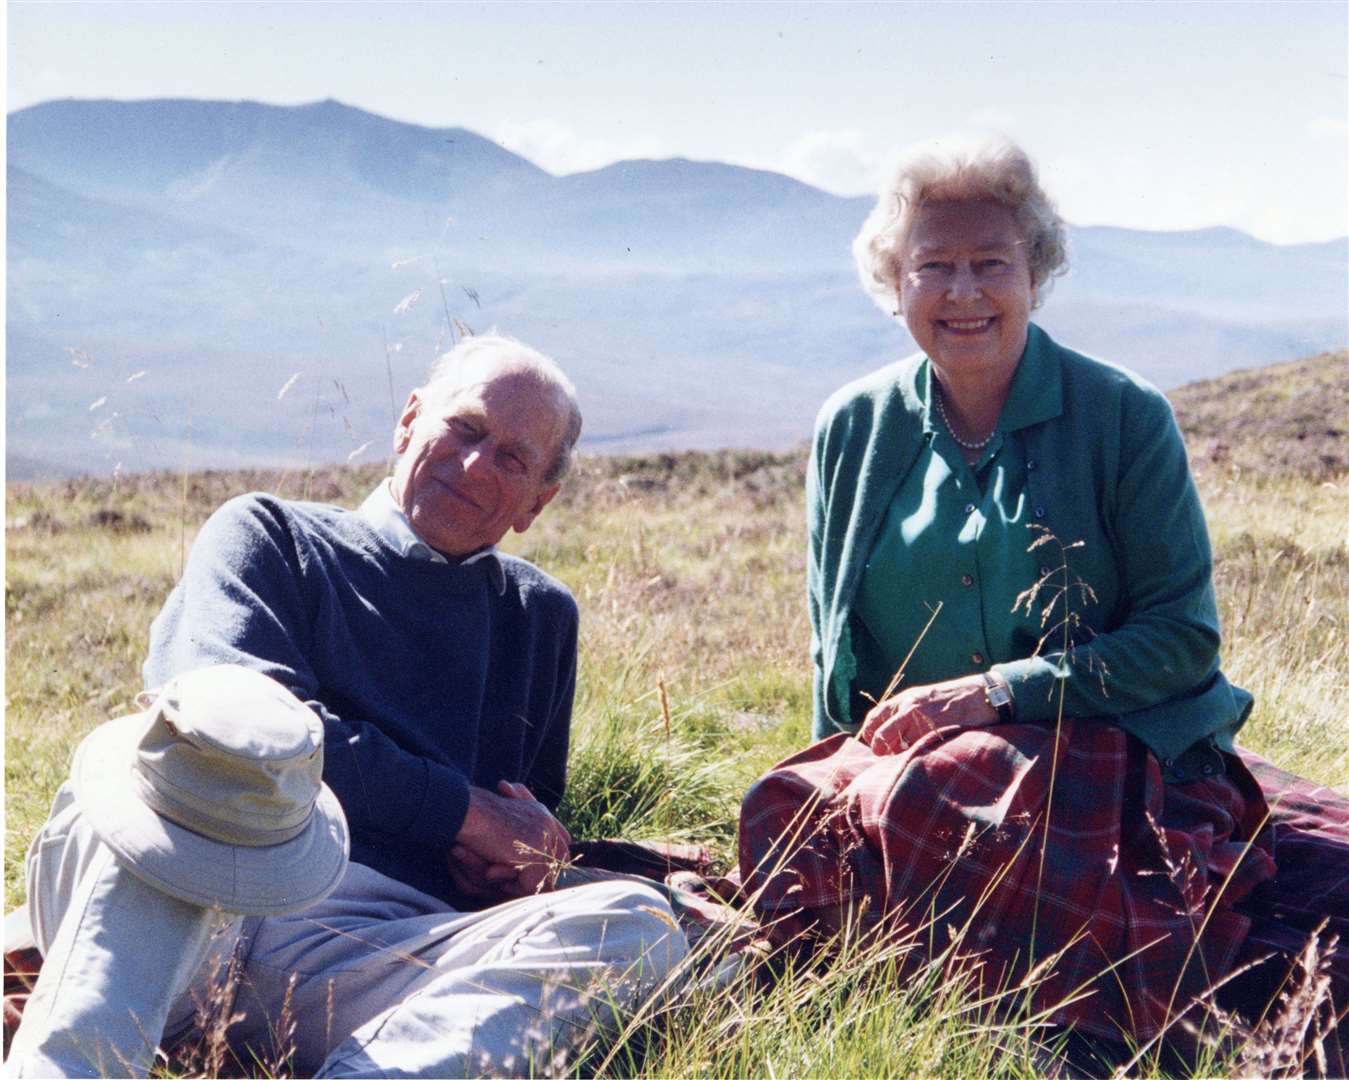 Philip and the Queen relax in the Highlands of Scotland in a private photo released in honour of the duke’s memory (Countess of Wessex)